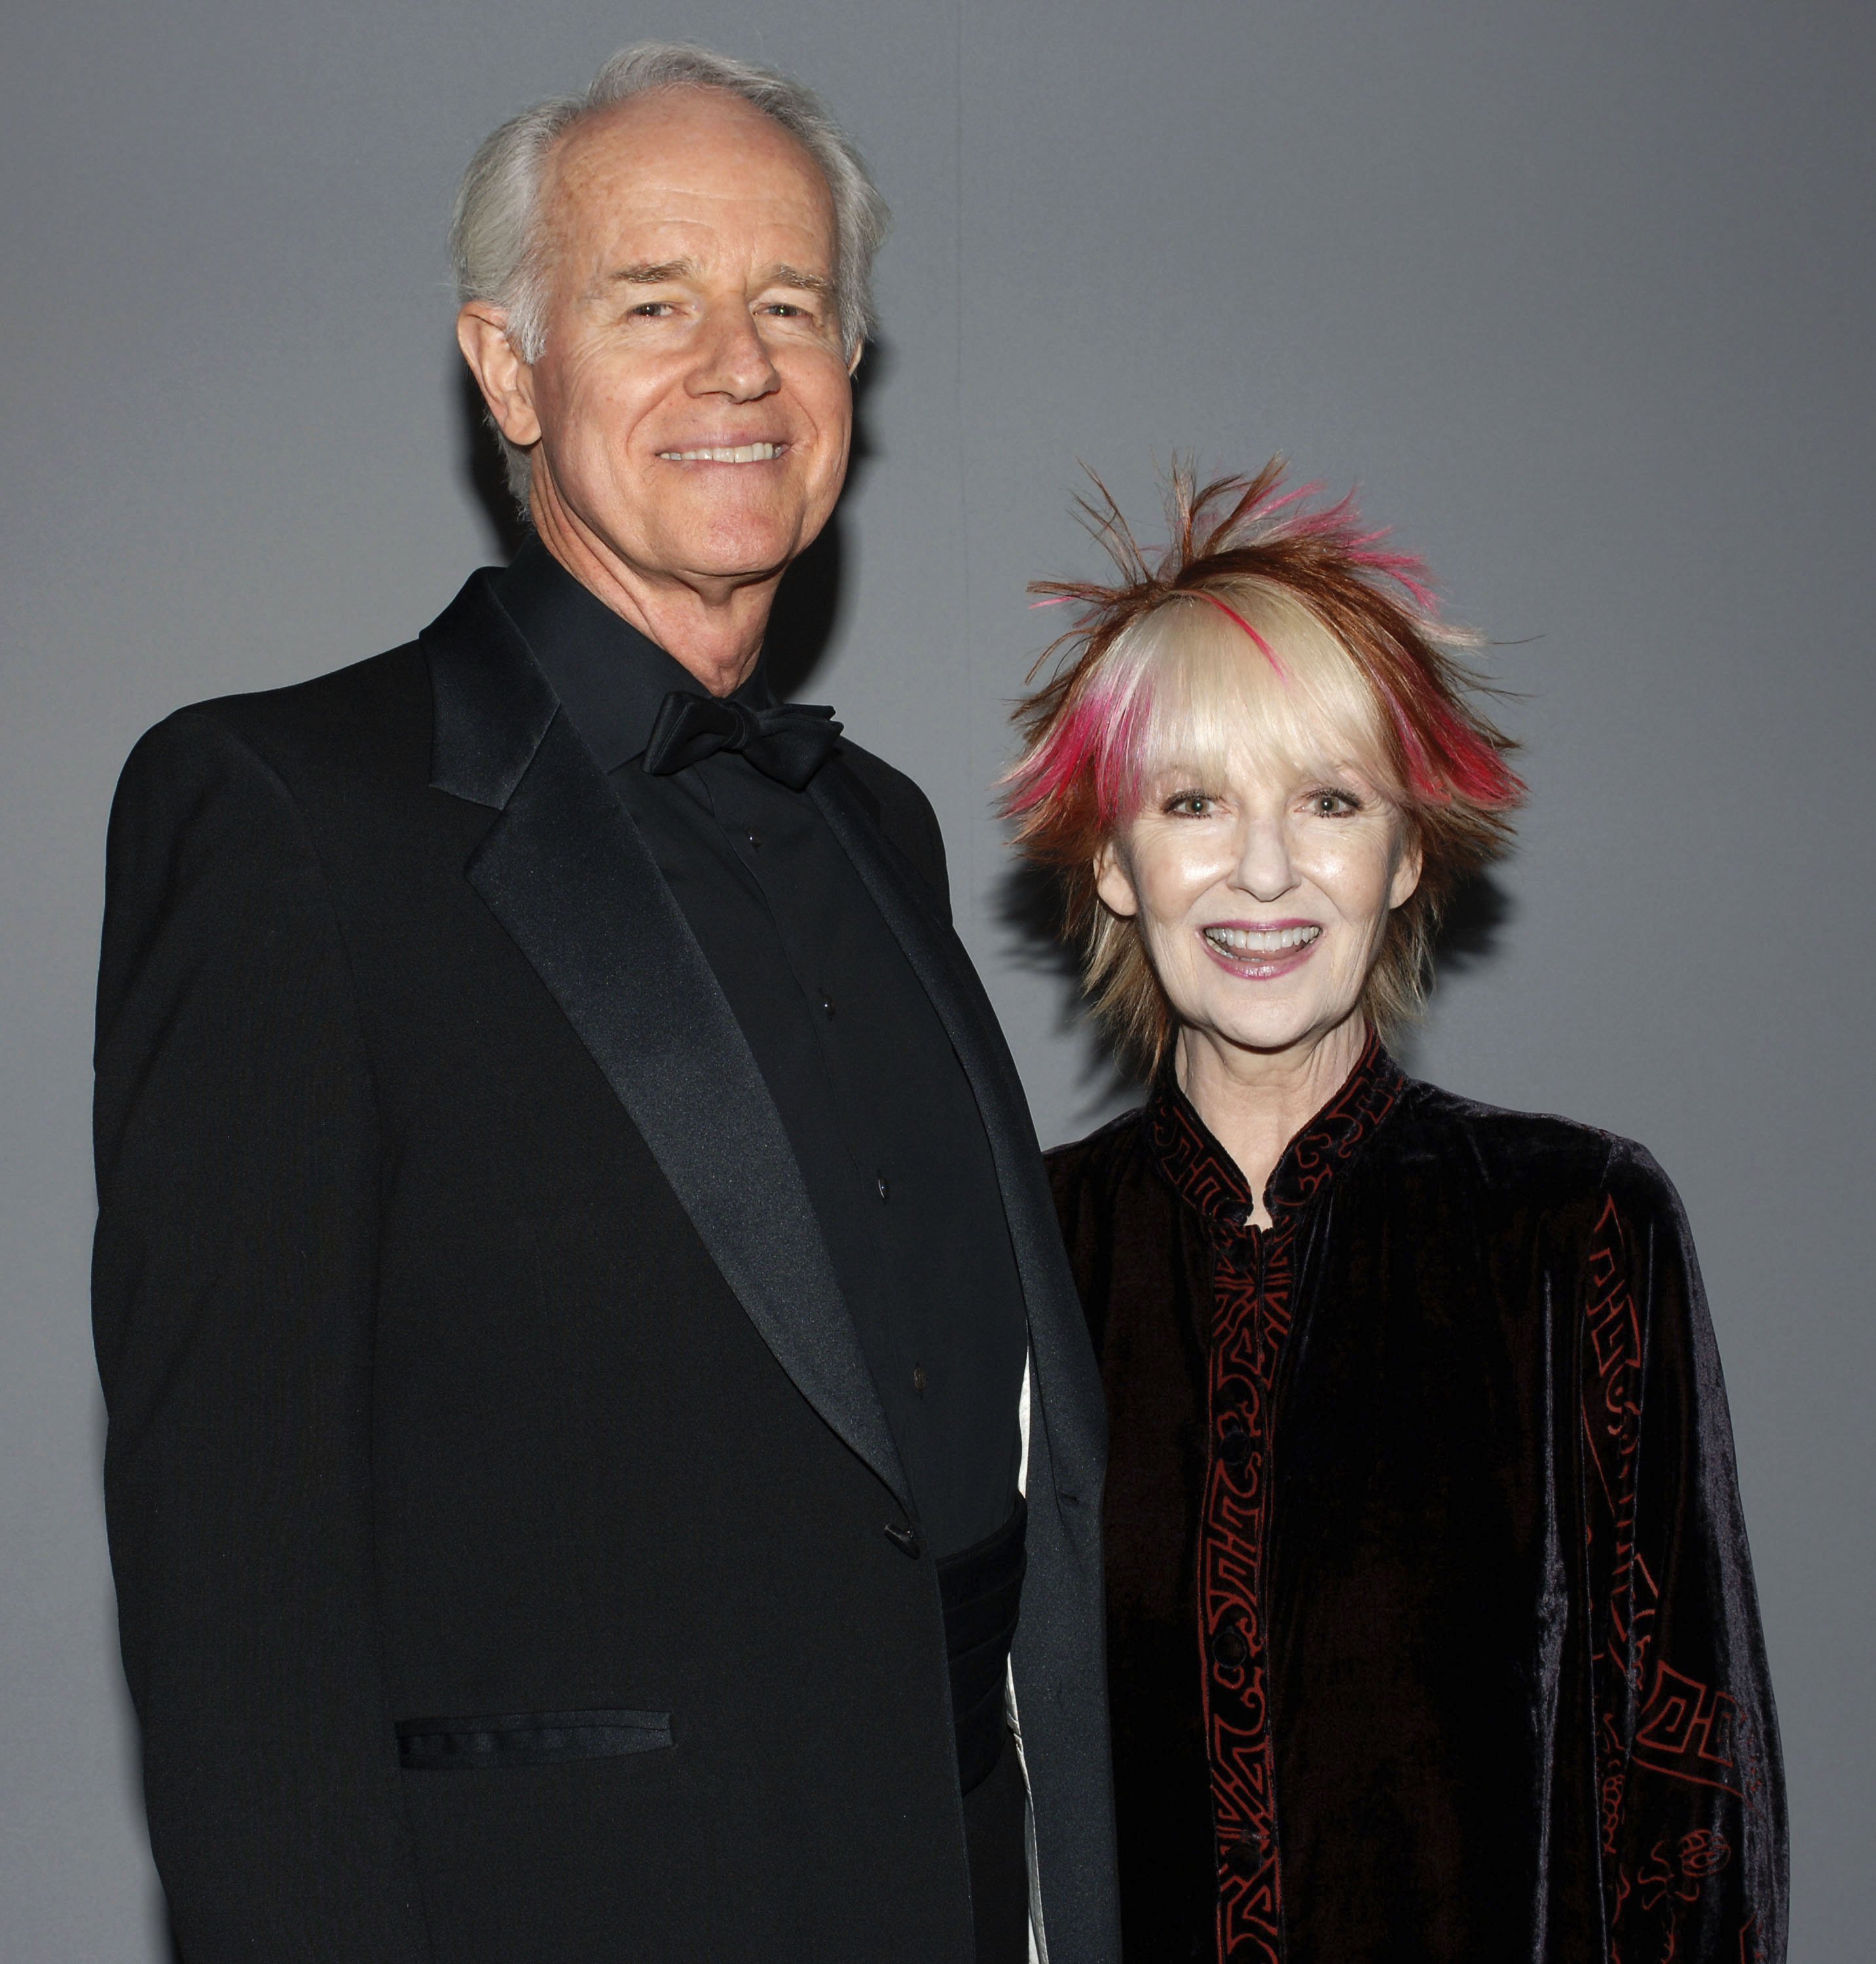 Mike Farrell and wife Shelley Fabares attend the 12th Annual Screen Actors Guild Awards at Los Angeles Shrine Exposition Center on January 29, 2006 in Los Angeles, California. | Source: Getty Images